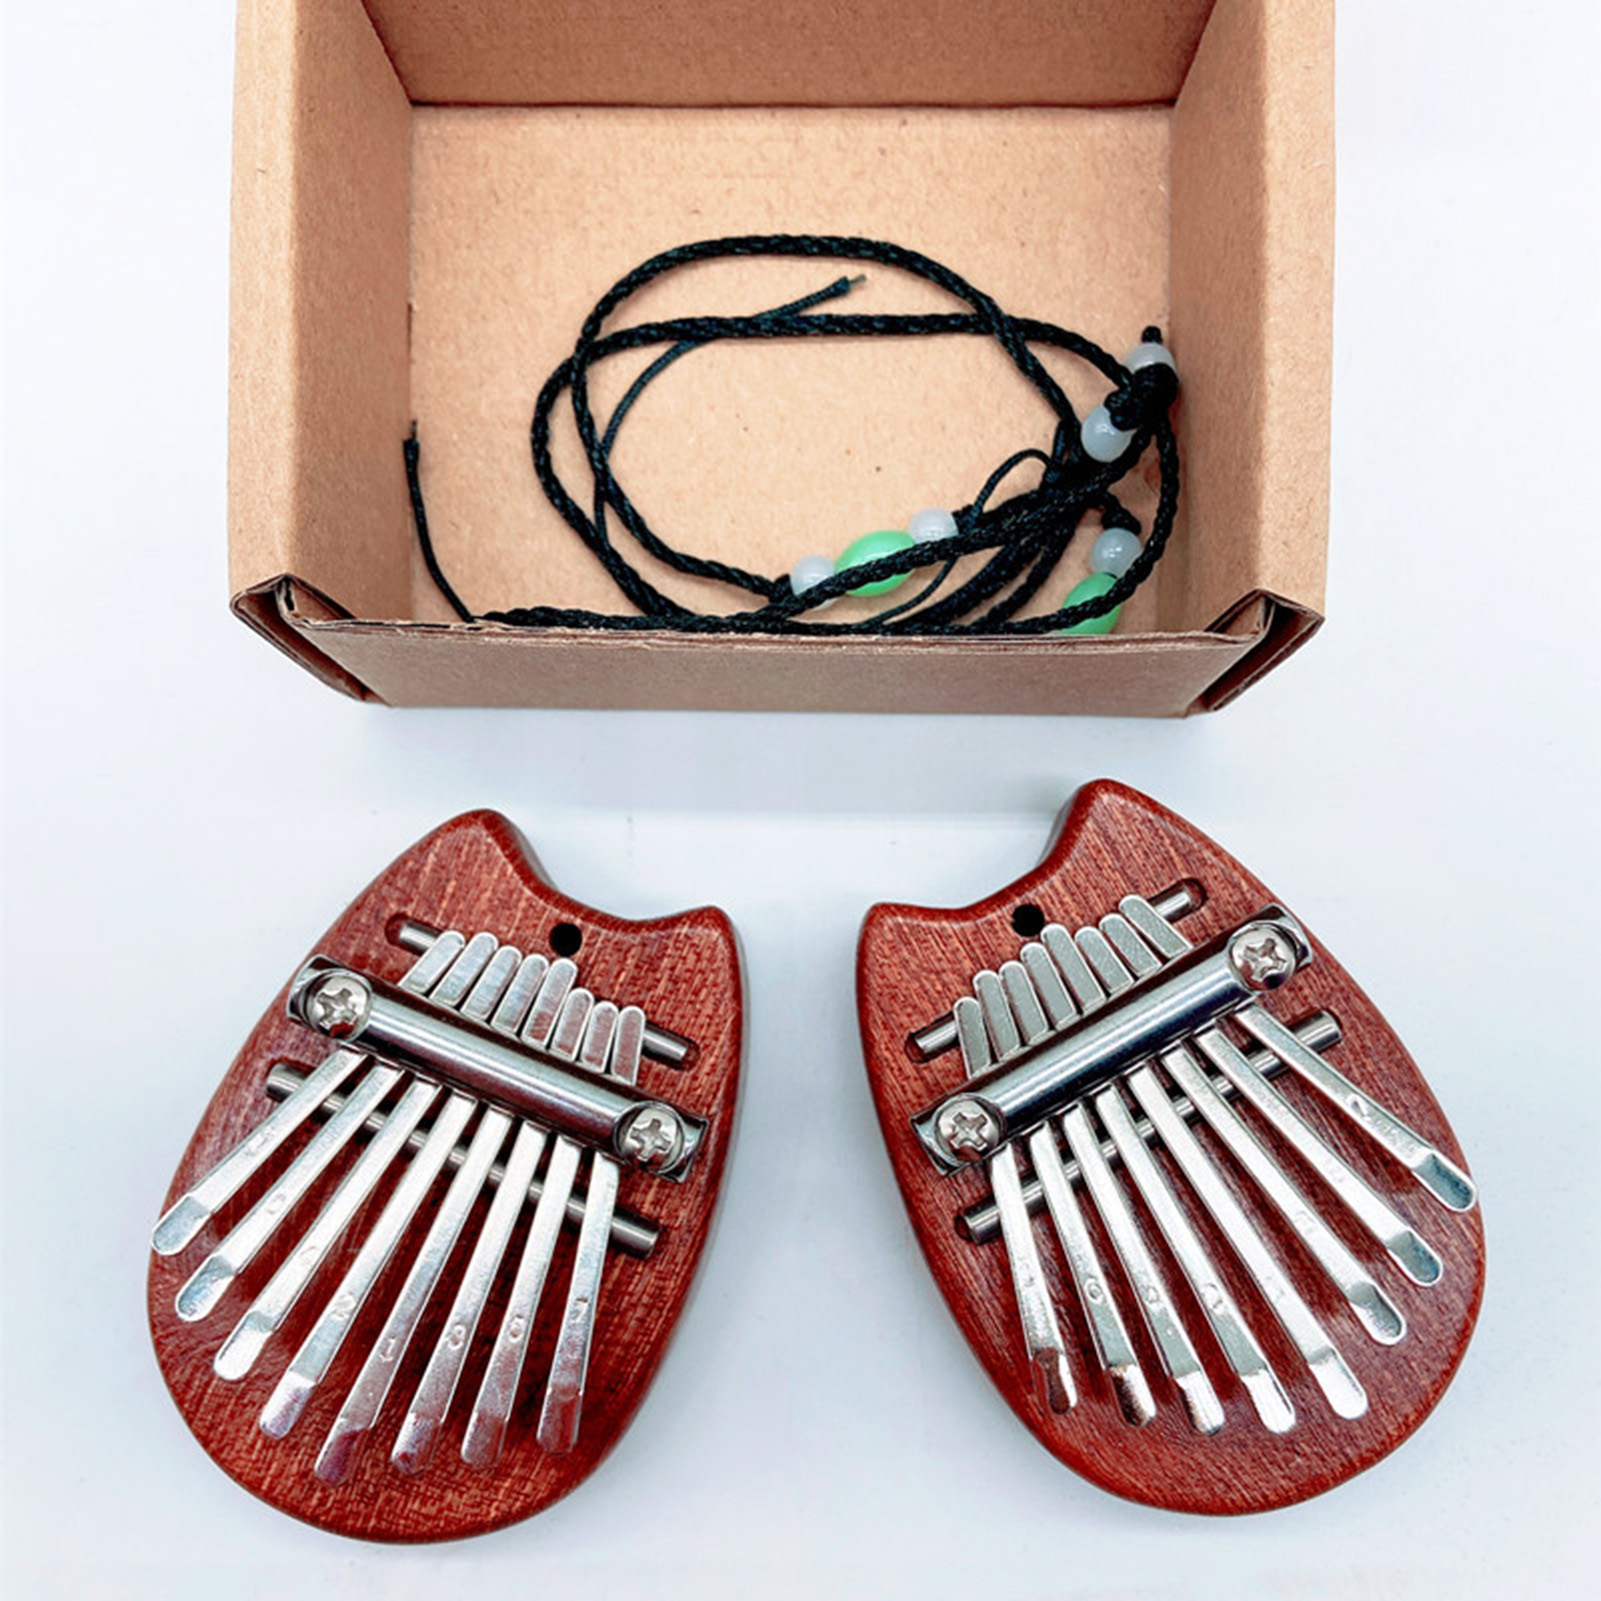 SANWOOD Thumb Piano Exquisite Fine Workmanship Musical Instrument Kalimba Finger Thumb Piano for Kids Adults Beginners - image 5 of 6